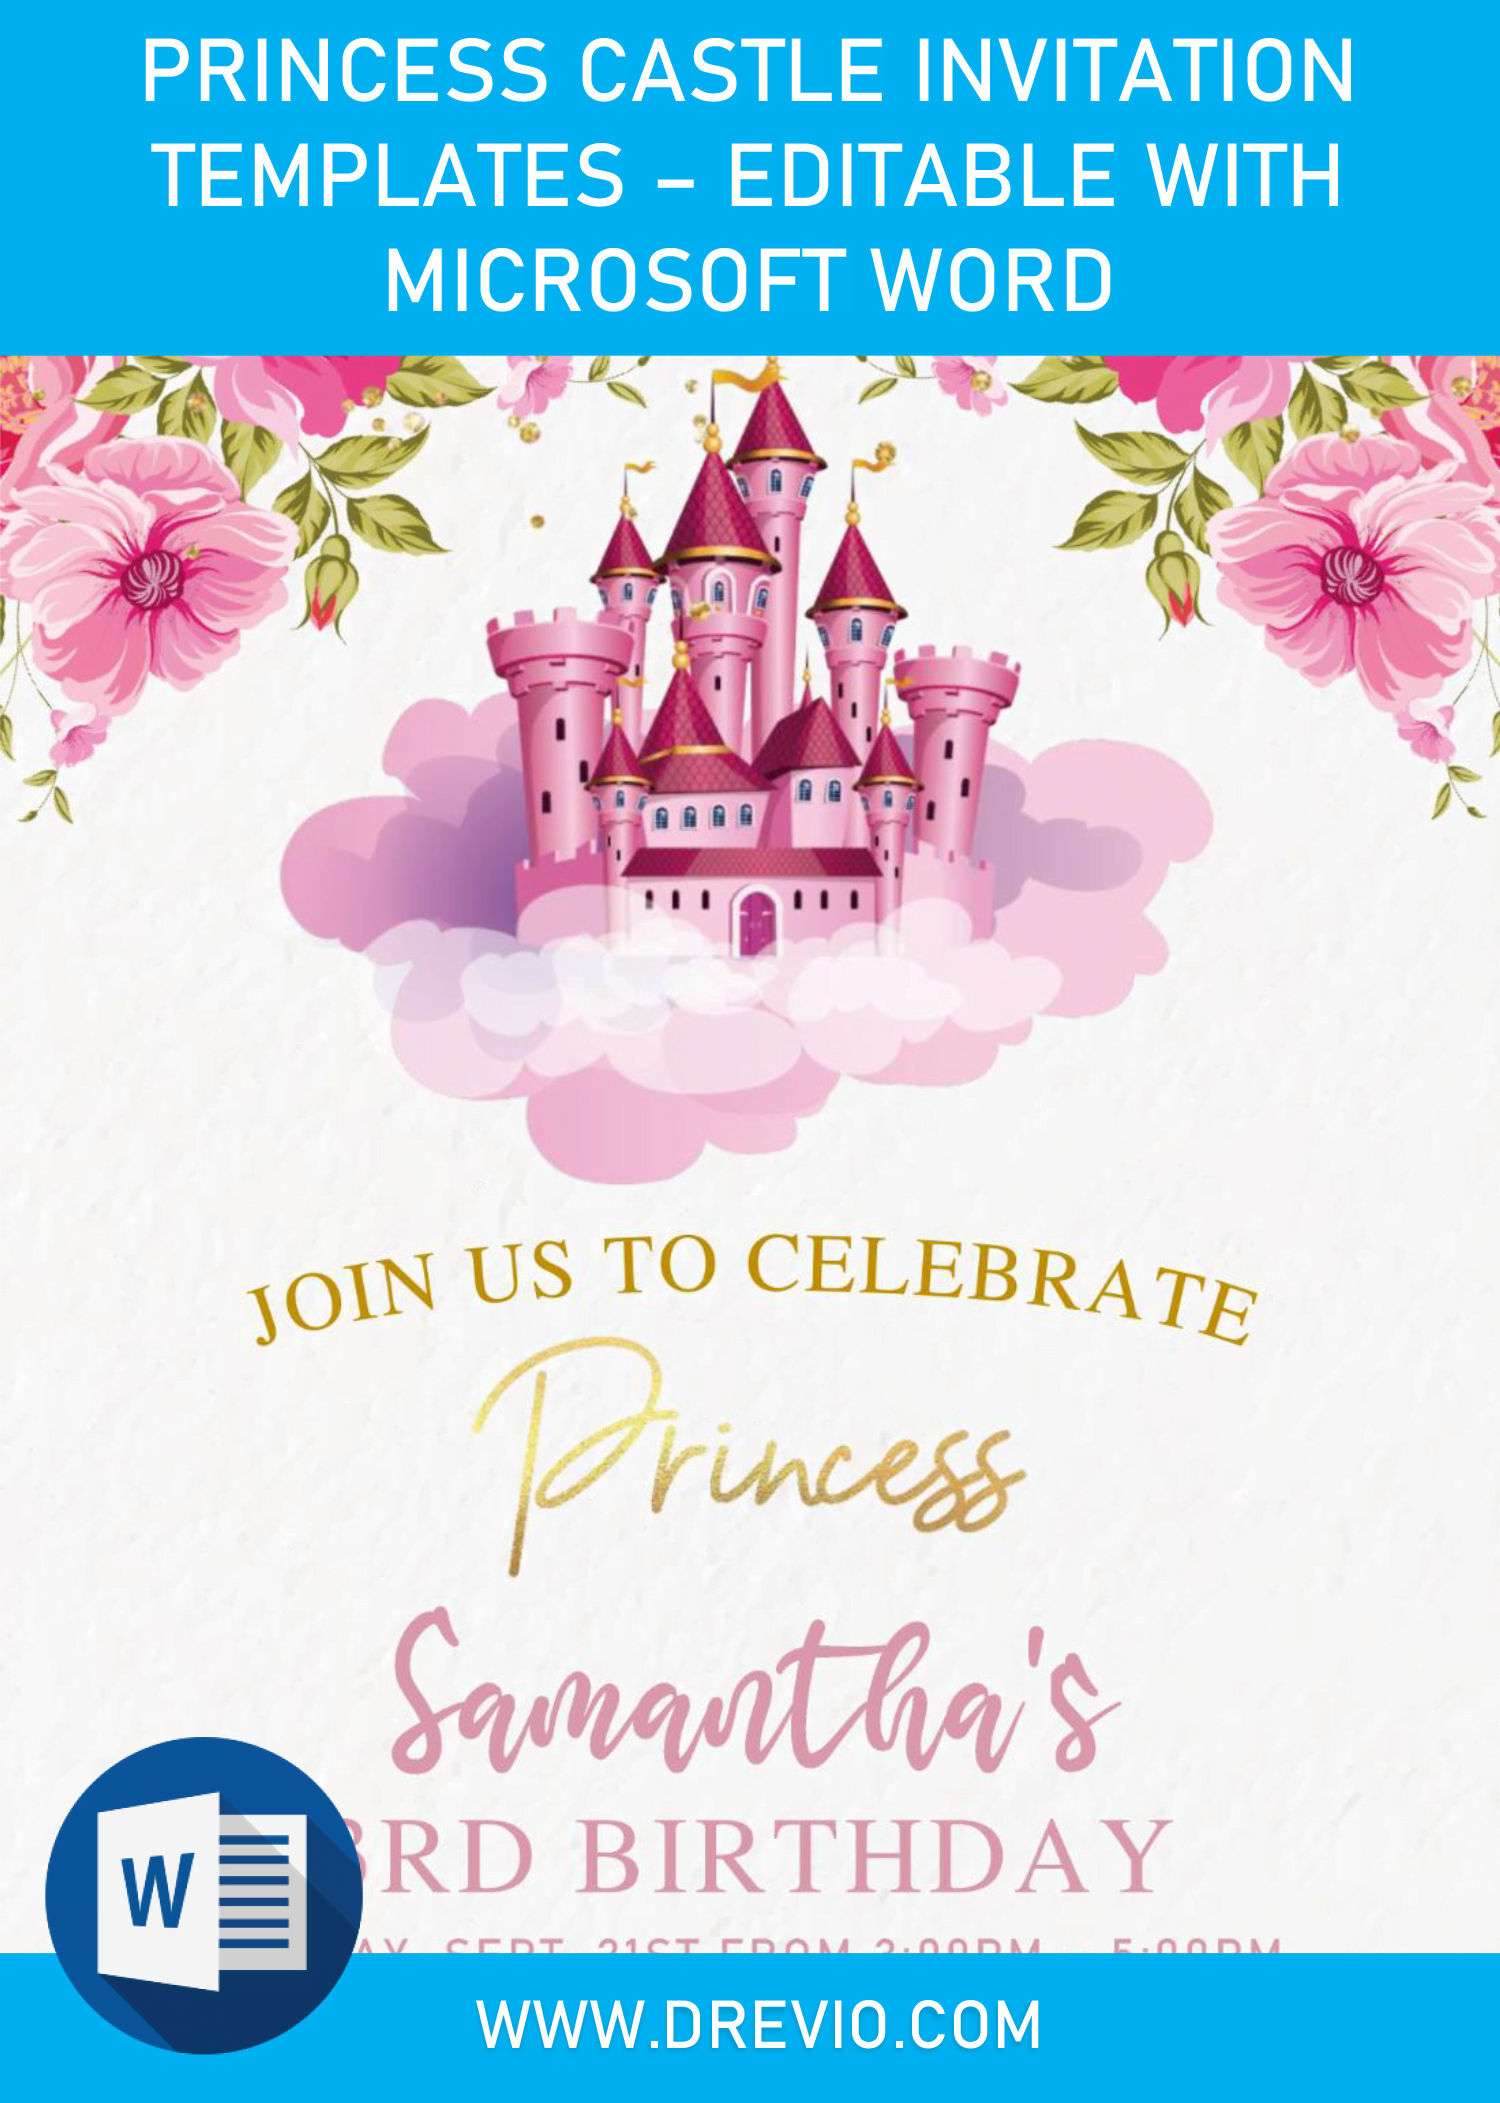 Princess Castle Invitation Templates Editable With Microsoft Word Download Hundreds Free Printable Birthday Invitation Templates